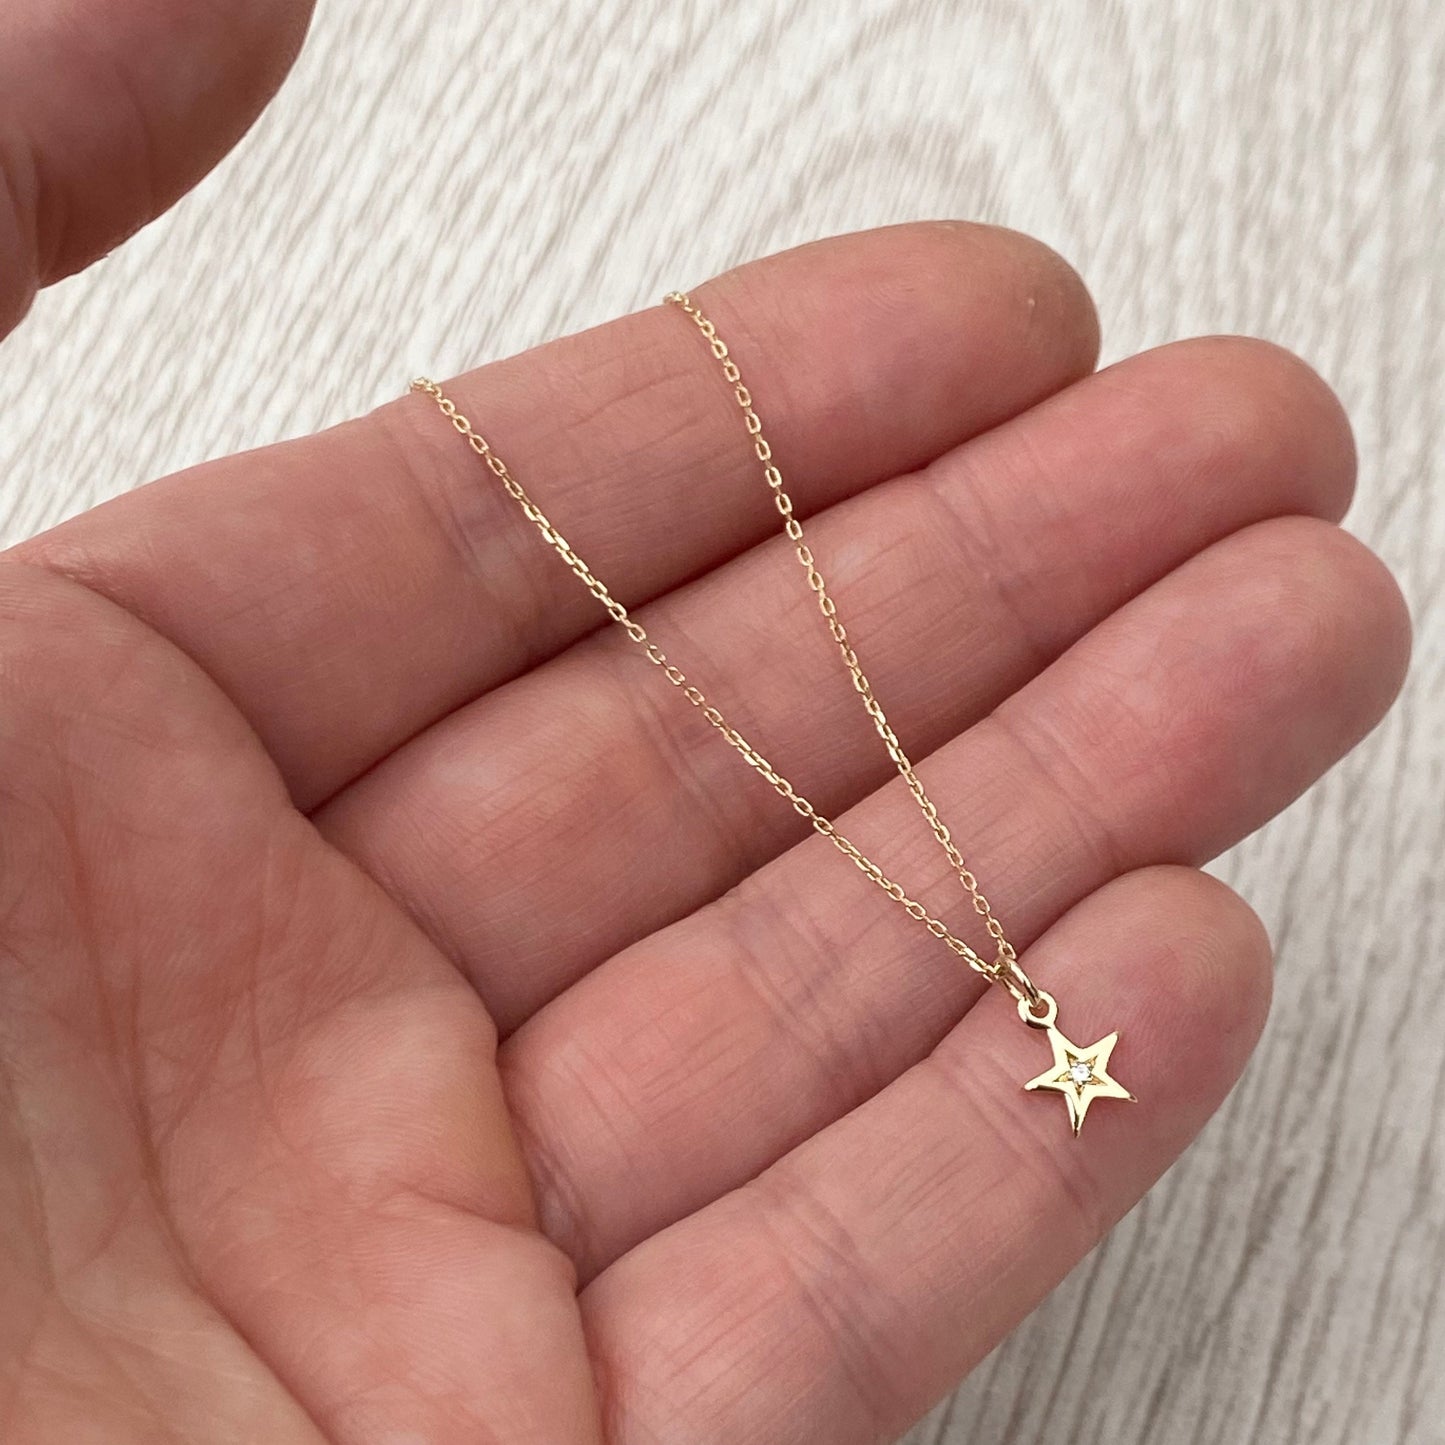 9ct solid yellow gold teeny-weeny diamond star charm pendant and chain